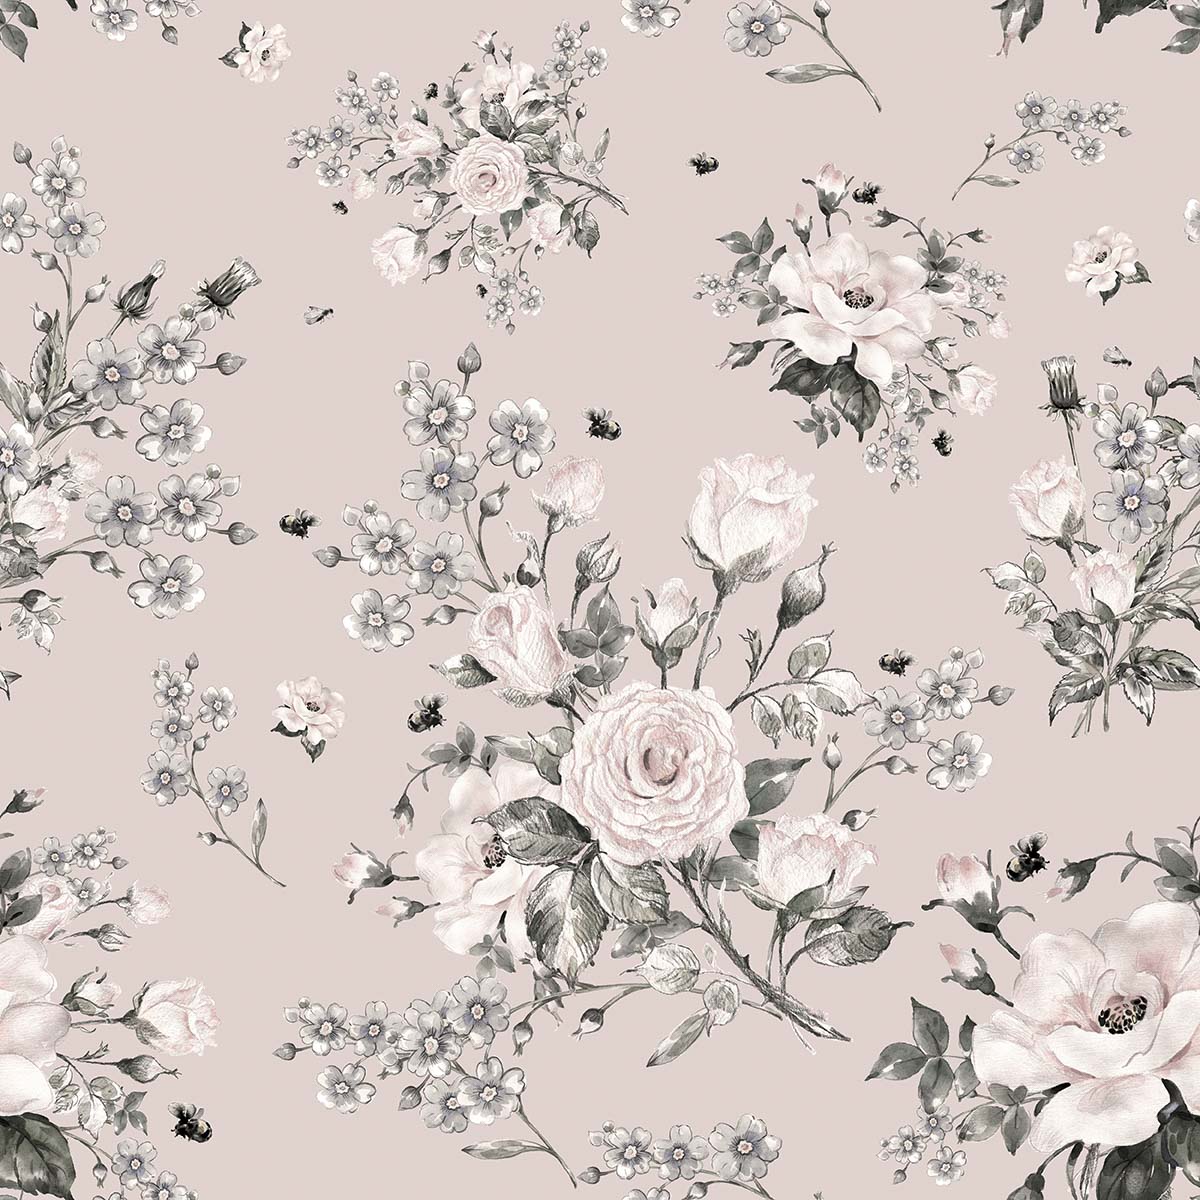 A pattern of flowers on a pink background